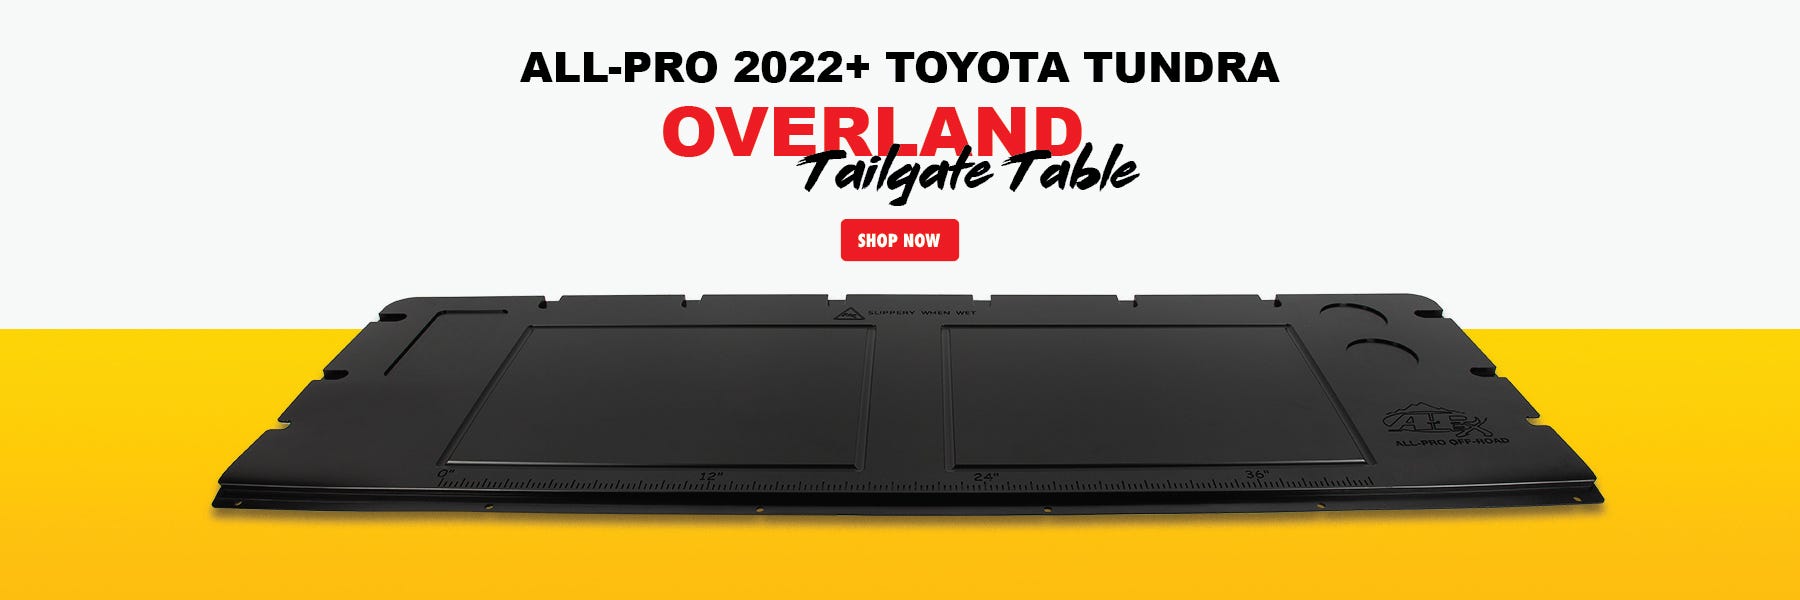 All-Pro Off-Road 2022+ Toyota Tundra Overland Tailgate Table